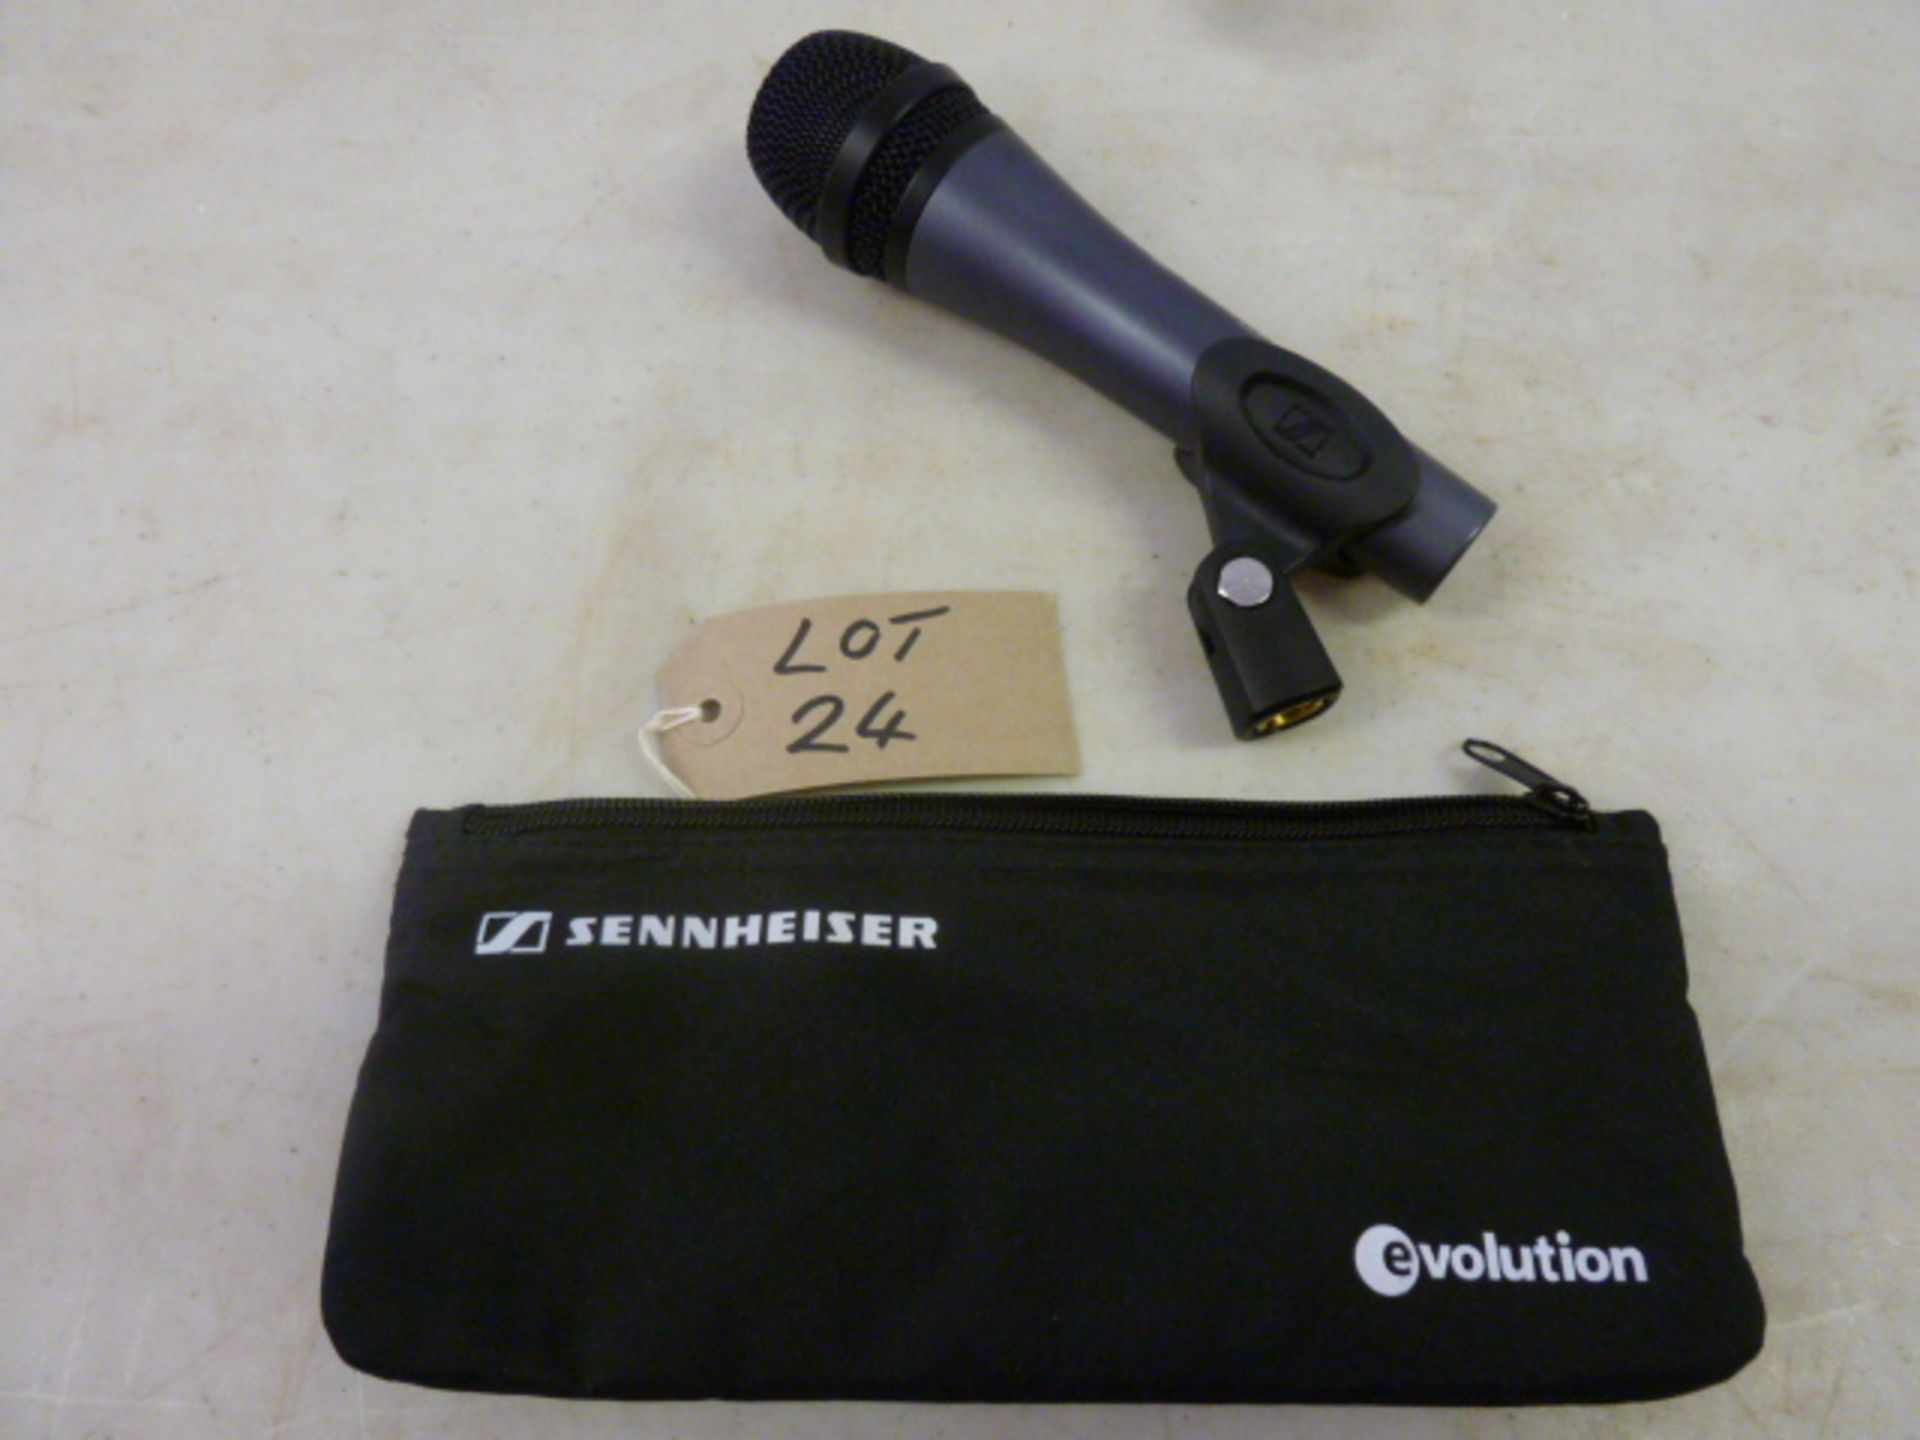 Sennheiser Evolution E 835 Microphone - Metallic Grey with Pouch & Microphone Stand Attachment.